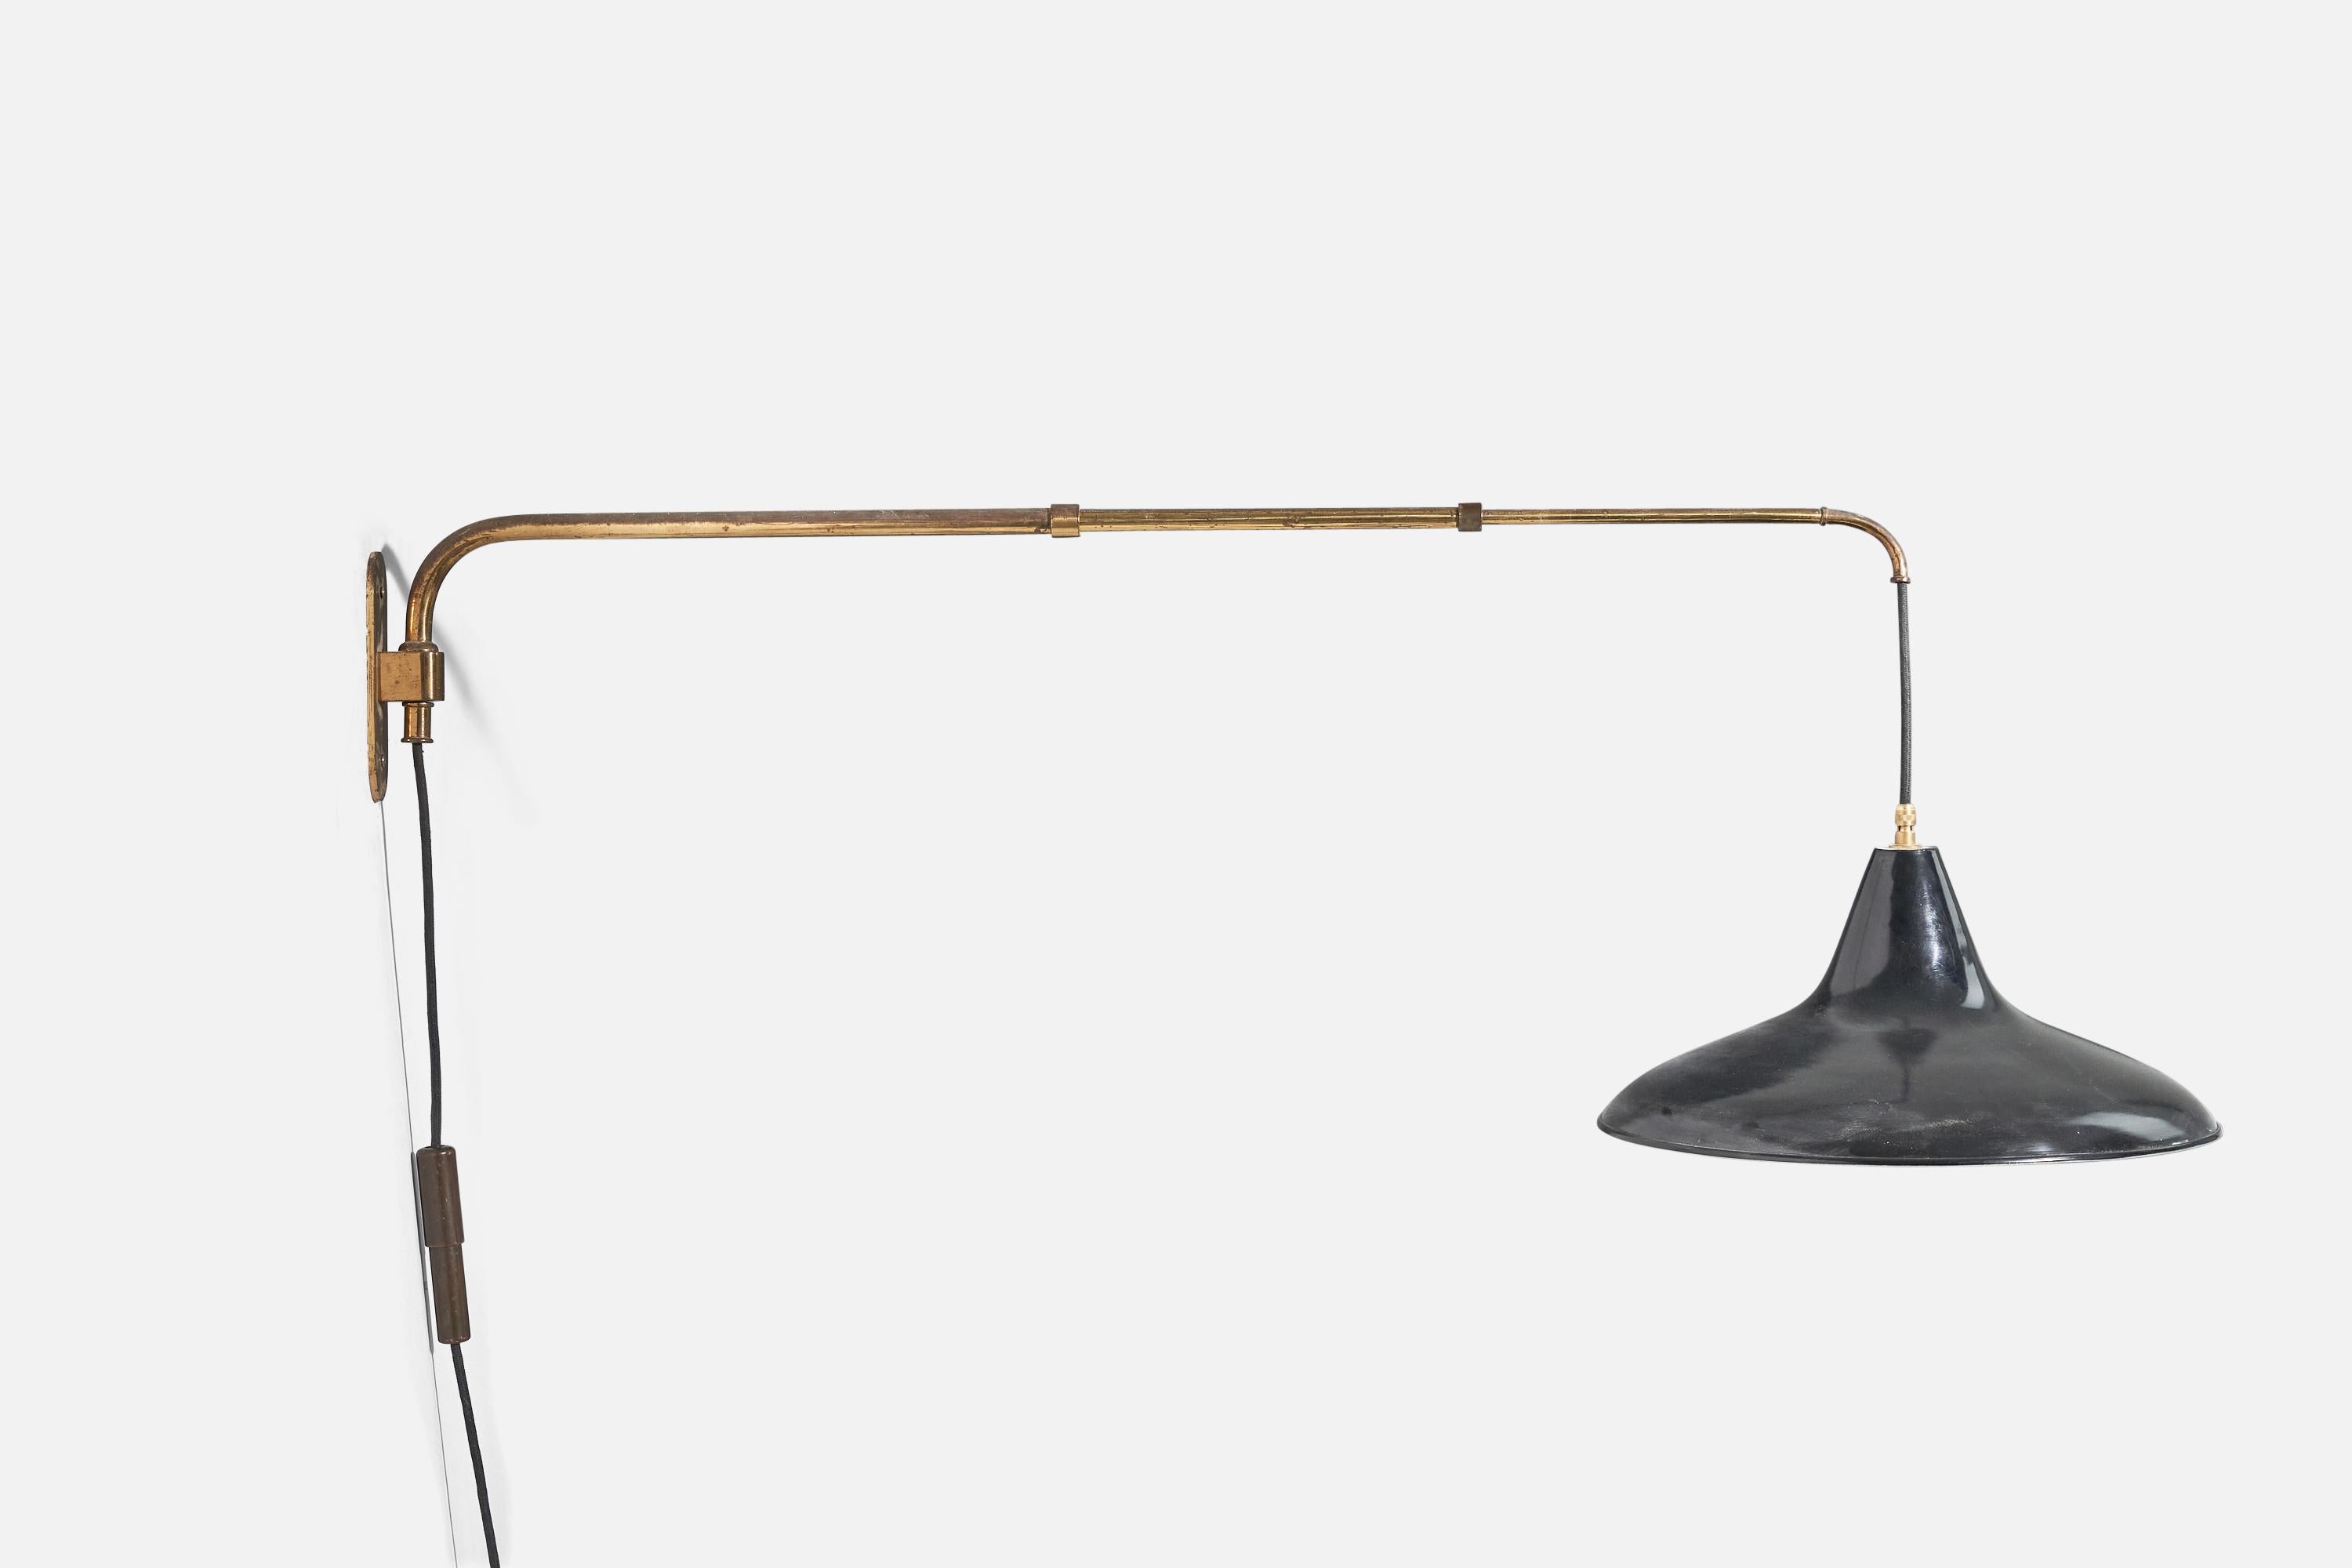 A brass and black-lacquered metal wall light designed and produced by an Italian designer, Italy, 1950s.

Variable dimensions, measured as illustrated in the first image.
 